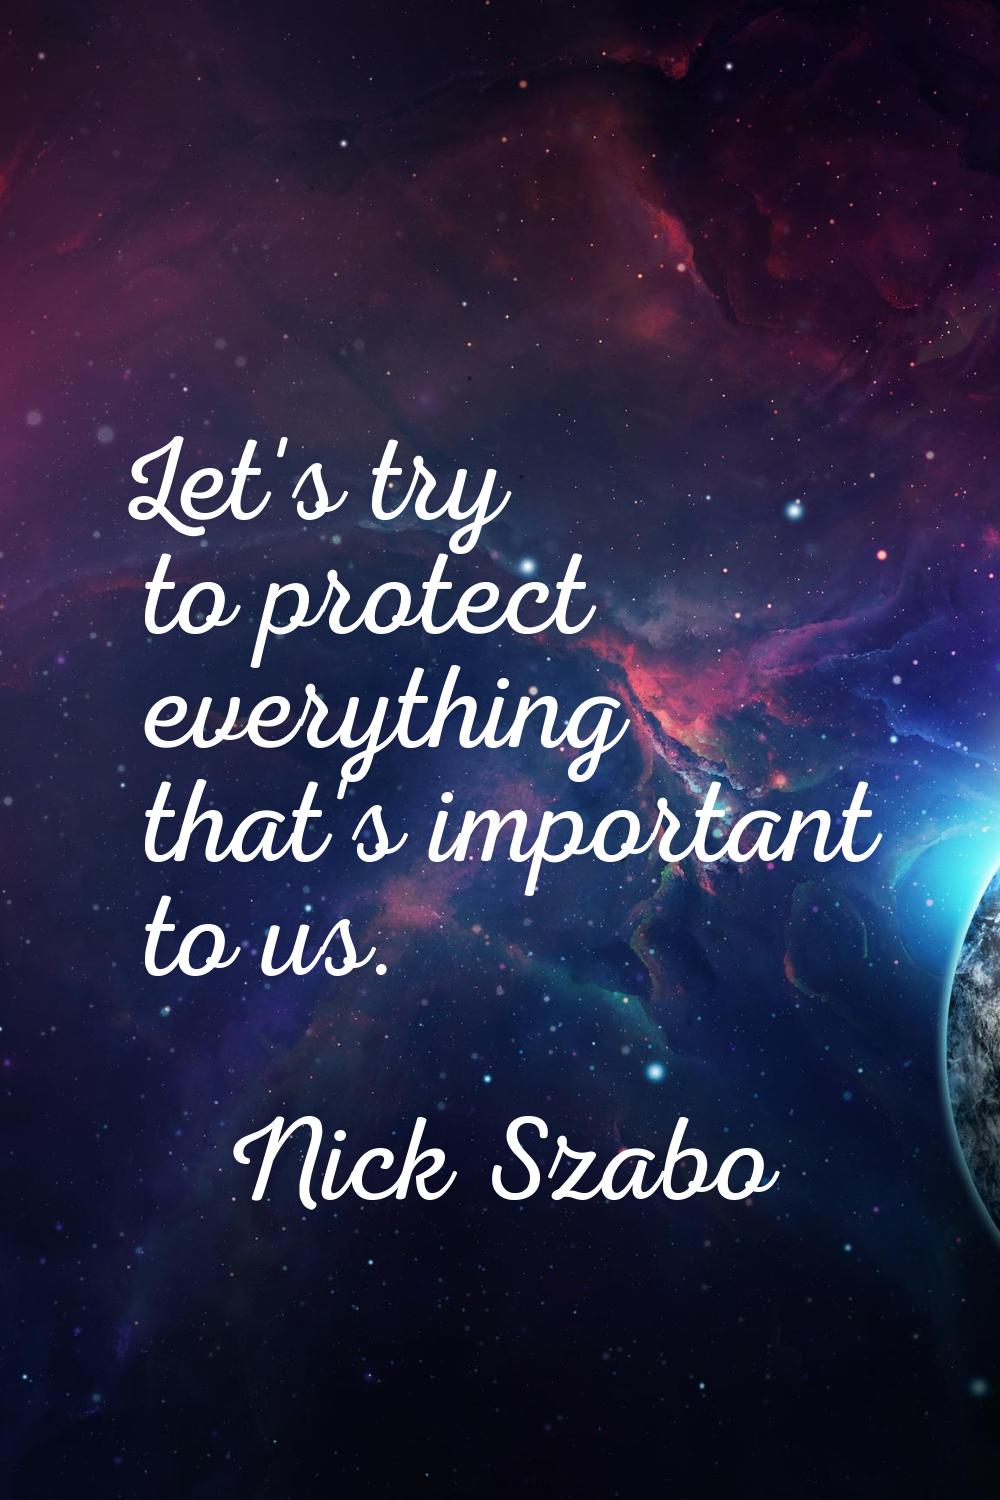 Let's try to protect everything that's important to us.